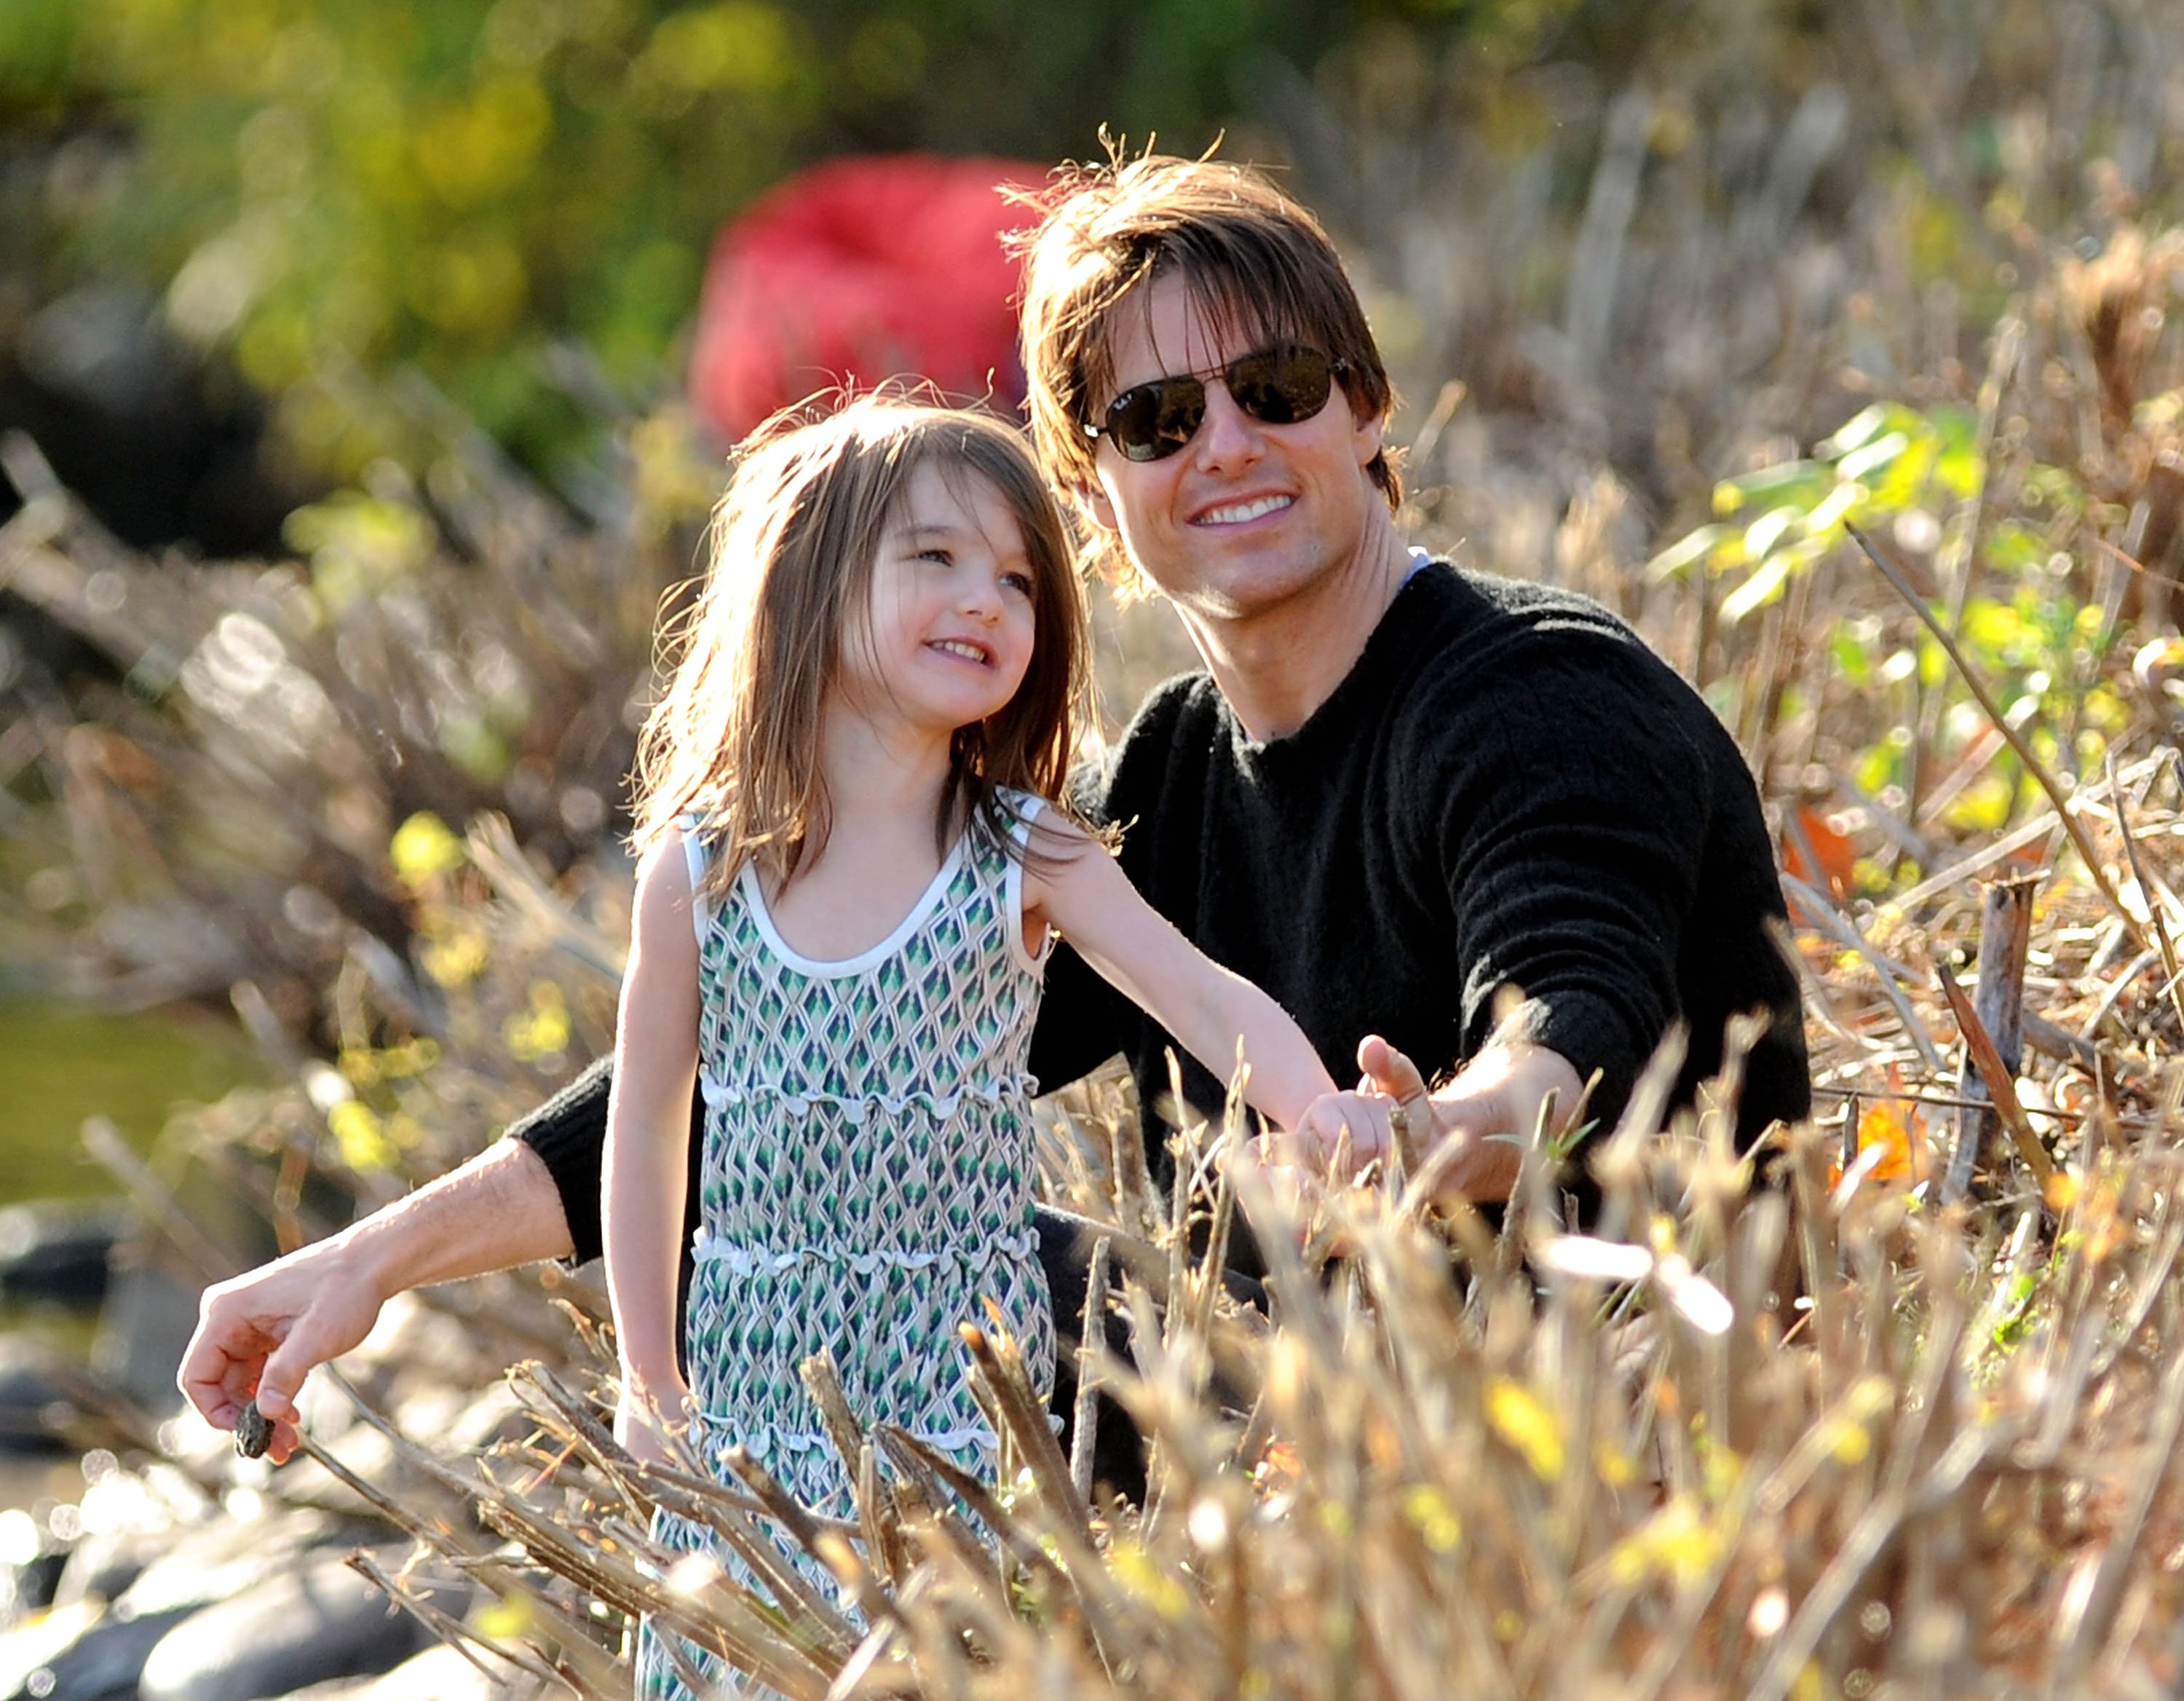 Suri and Tom Cruise visit Charles River Basin on October 10, 2009, in Cambridge, Massachusetts | Source: Getty Images